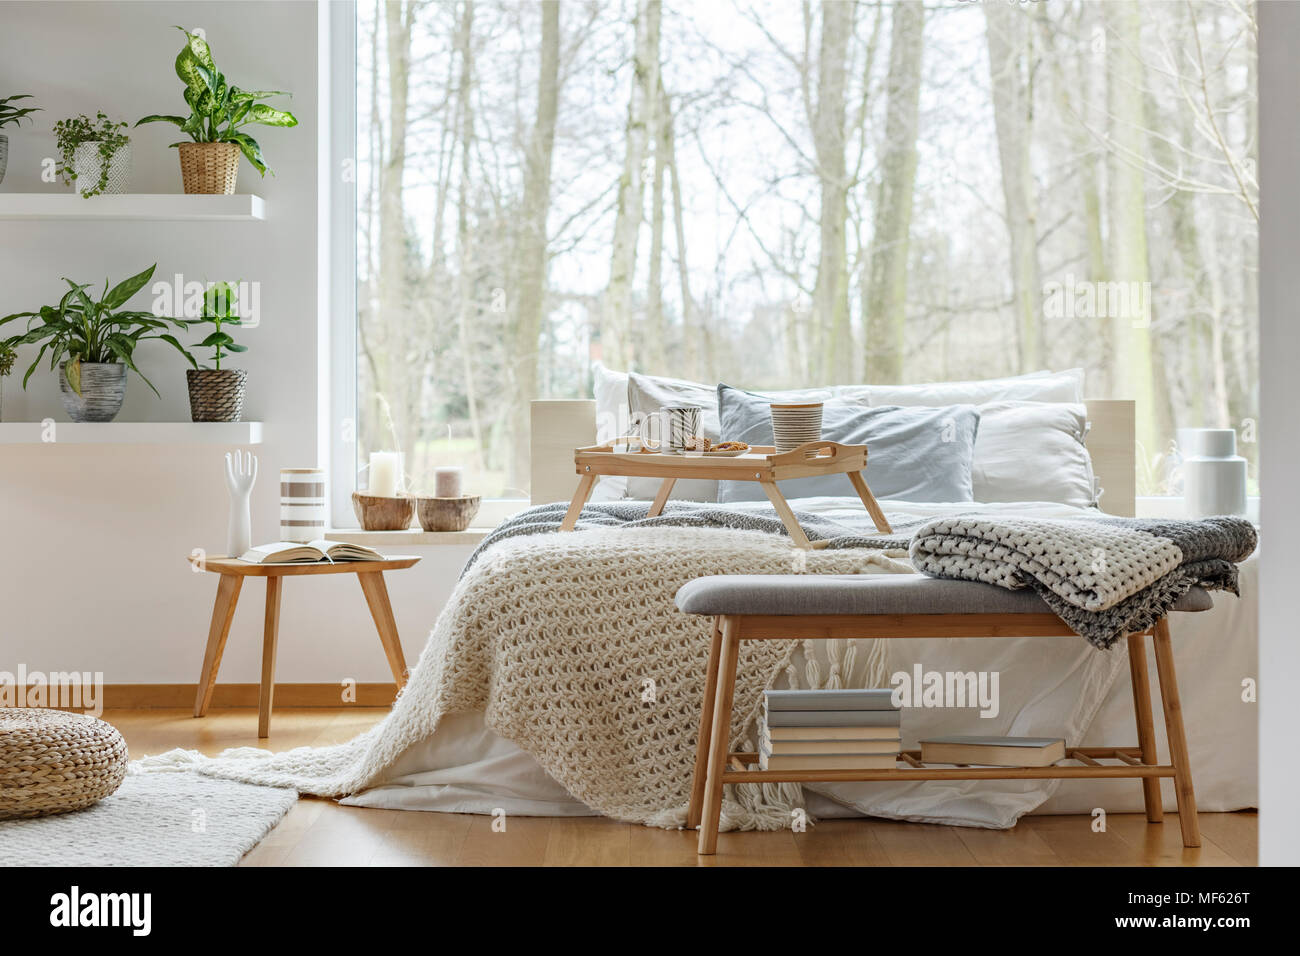 Blanket On Wooden Bench With Books In Front Of Bed In Cozy Bedroom Interior With Plants Stock Photo Alamy